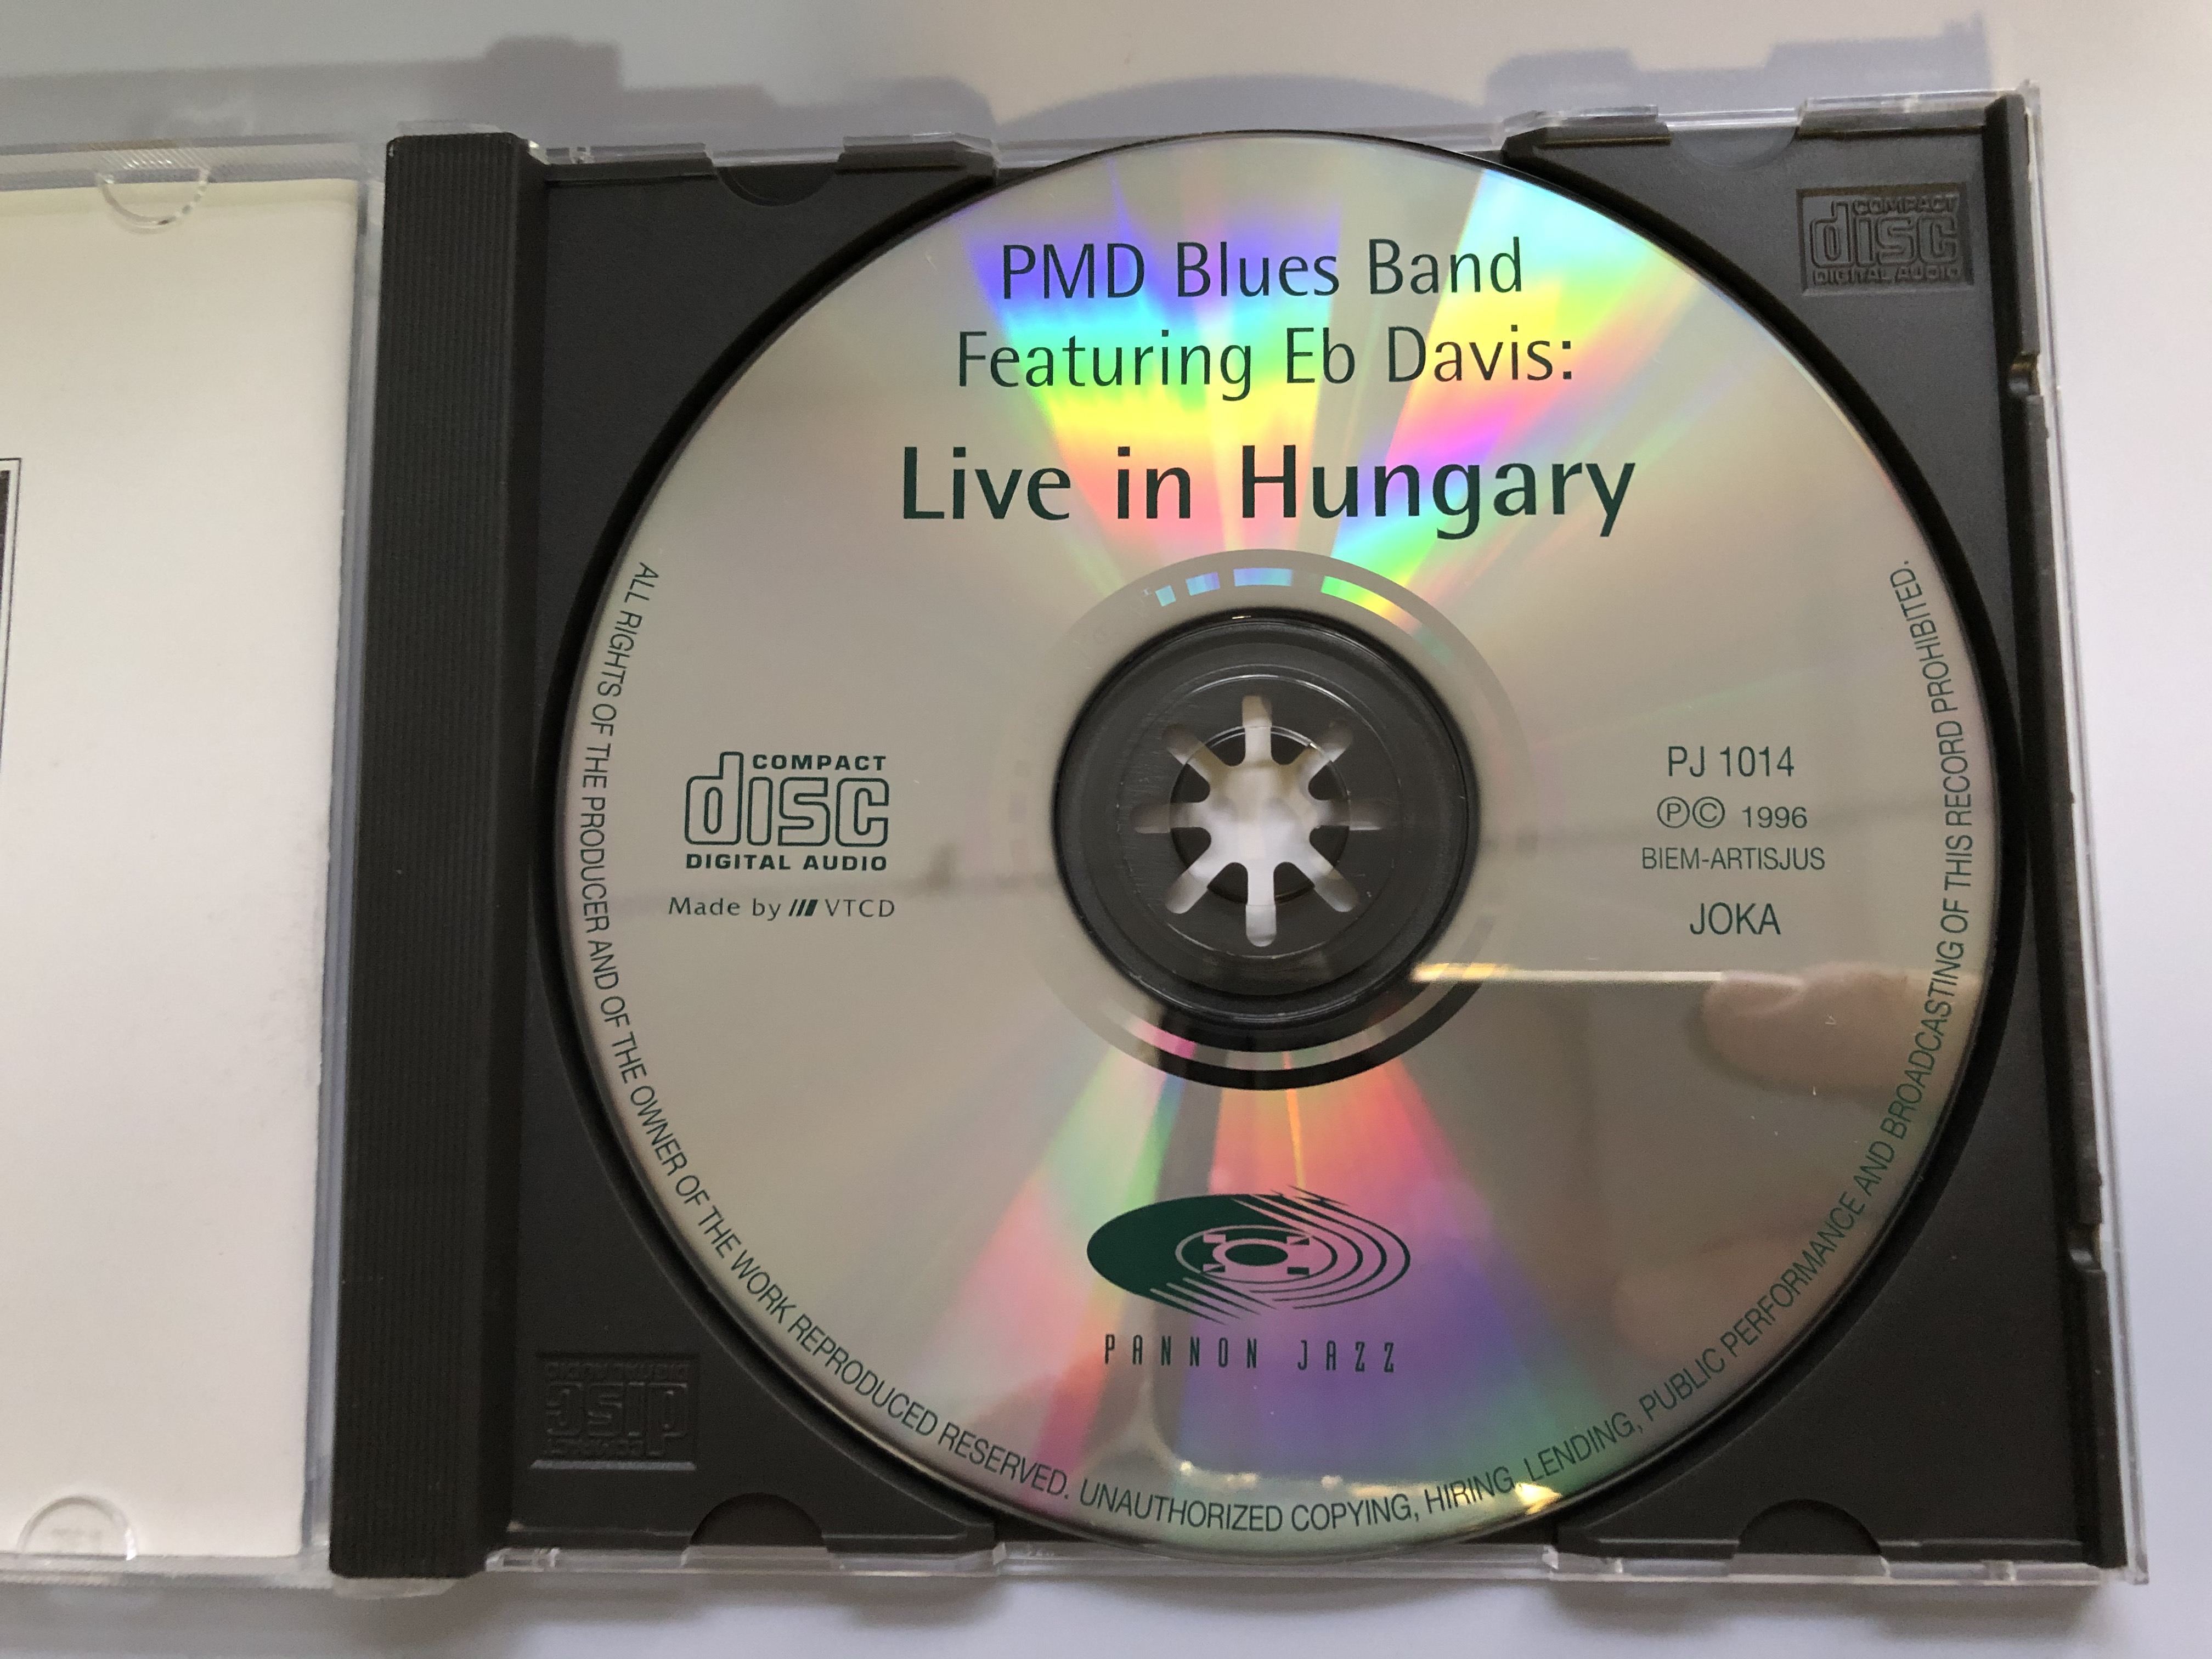 pmd-blues-band-featuring-eb-davis-live-in-hungary-foundation-for-jazz-education-and-research-in-hungary-presents-first-time-pannon-jazz-audio-cd-1996-pj-1014-4-.jpg